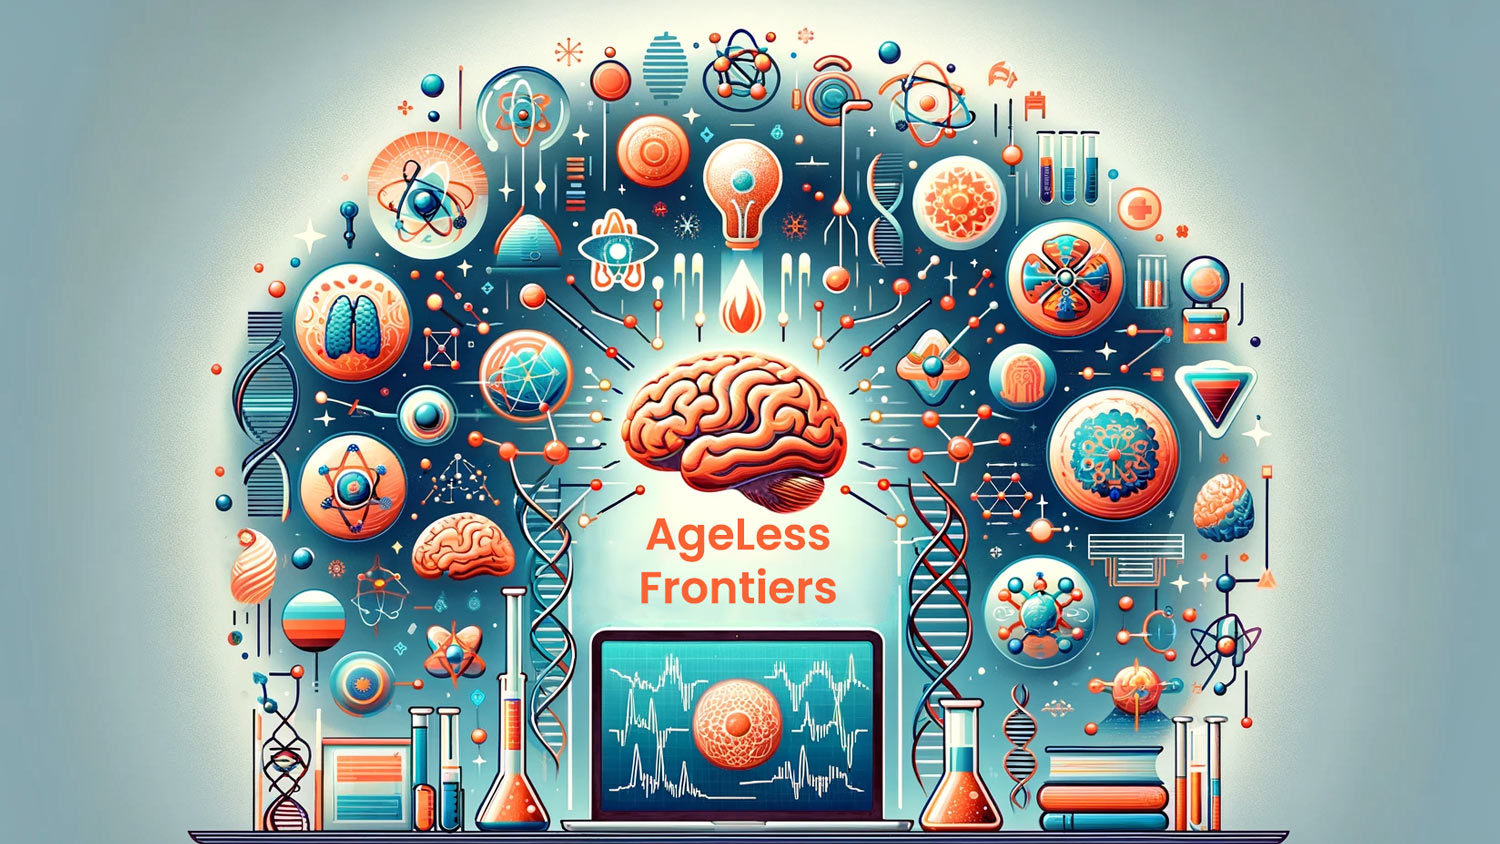 ageless frontiers anti-aging and bio-hacking research